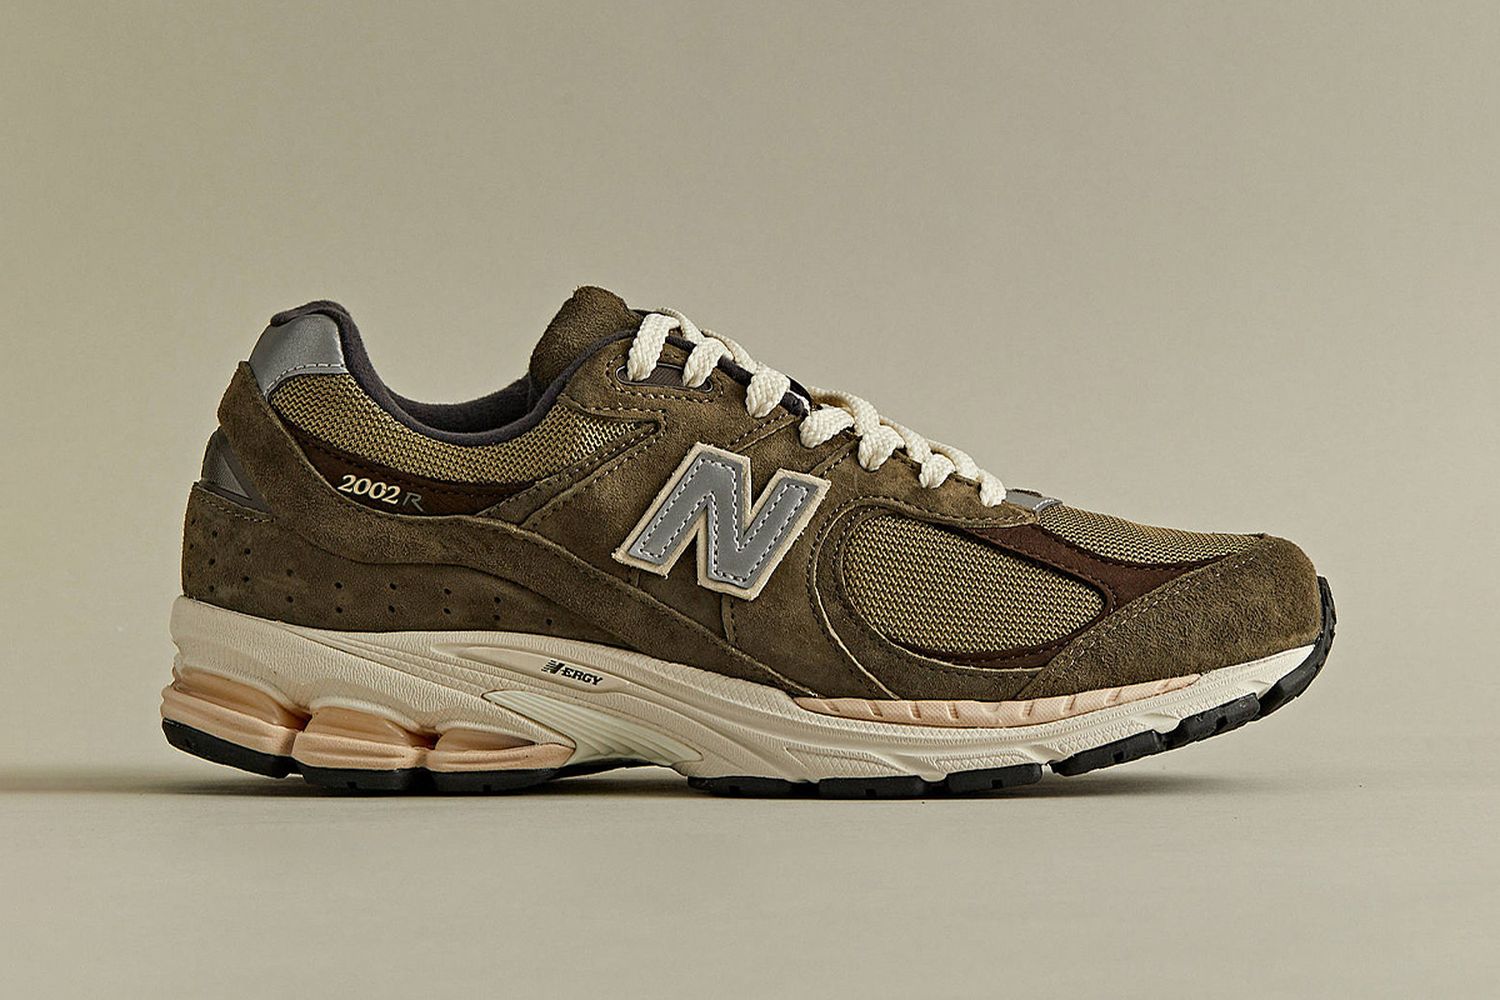 Sureste Predicar Zanahoria The 13 Best New Balance Sneakers Available to Buy Right Now